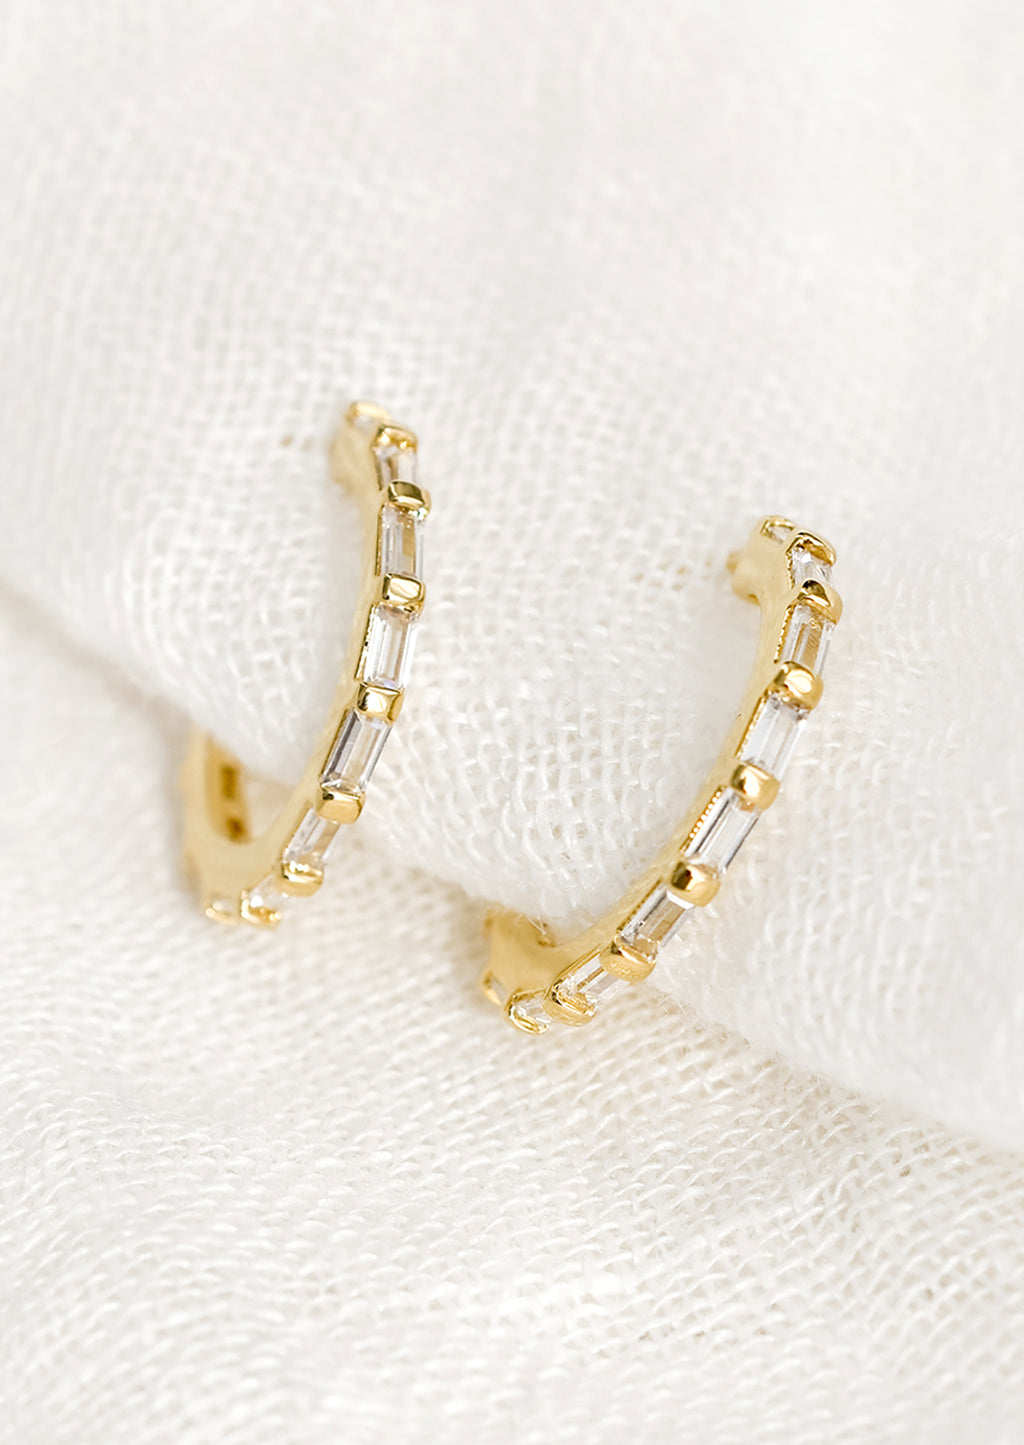 1: A pair of gold hoops with clear baguette shape crystals.